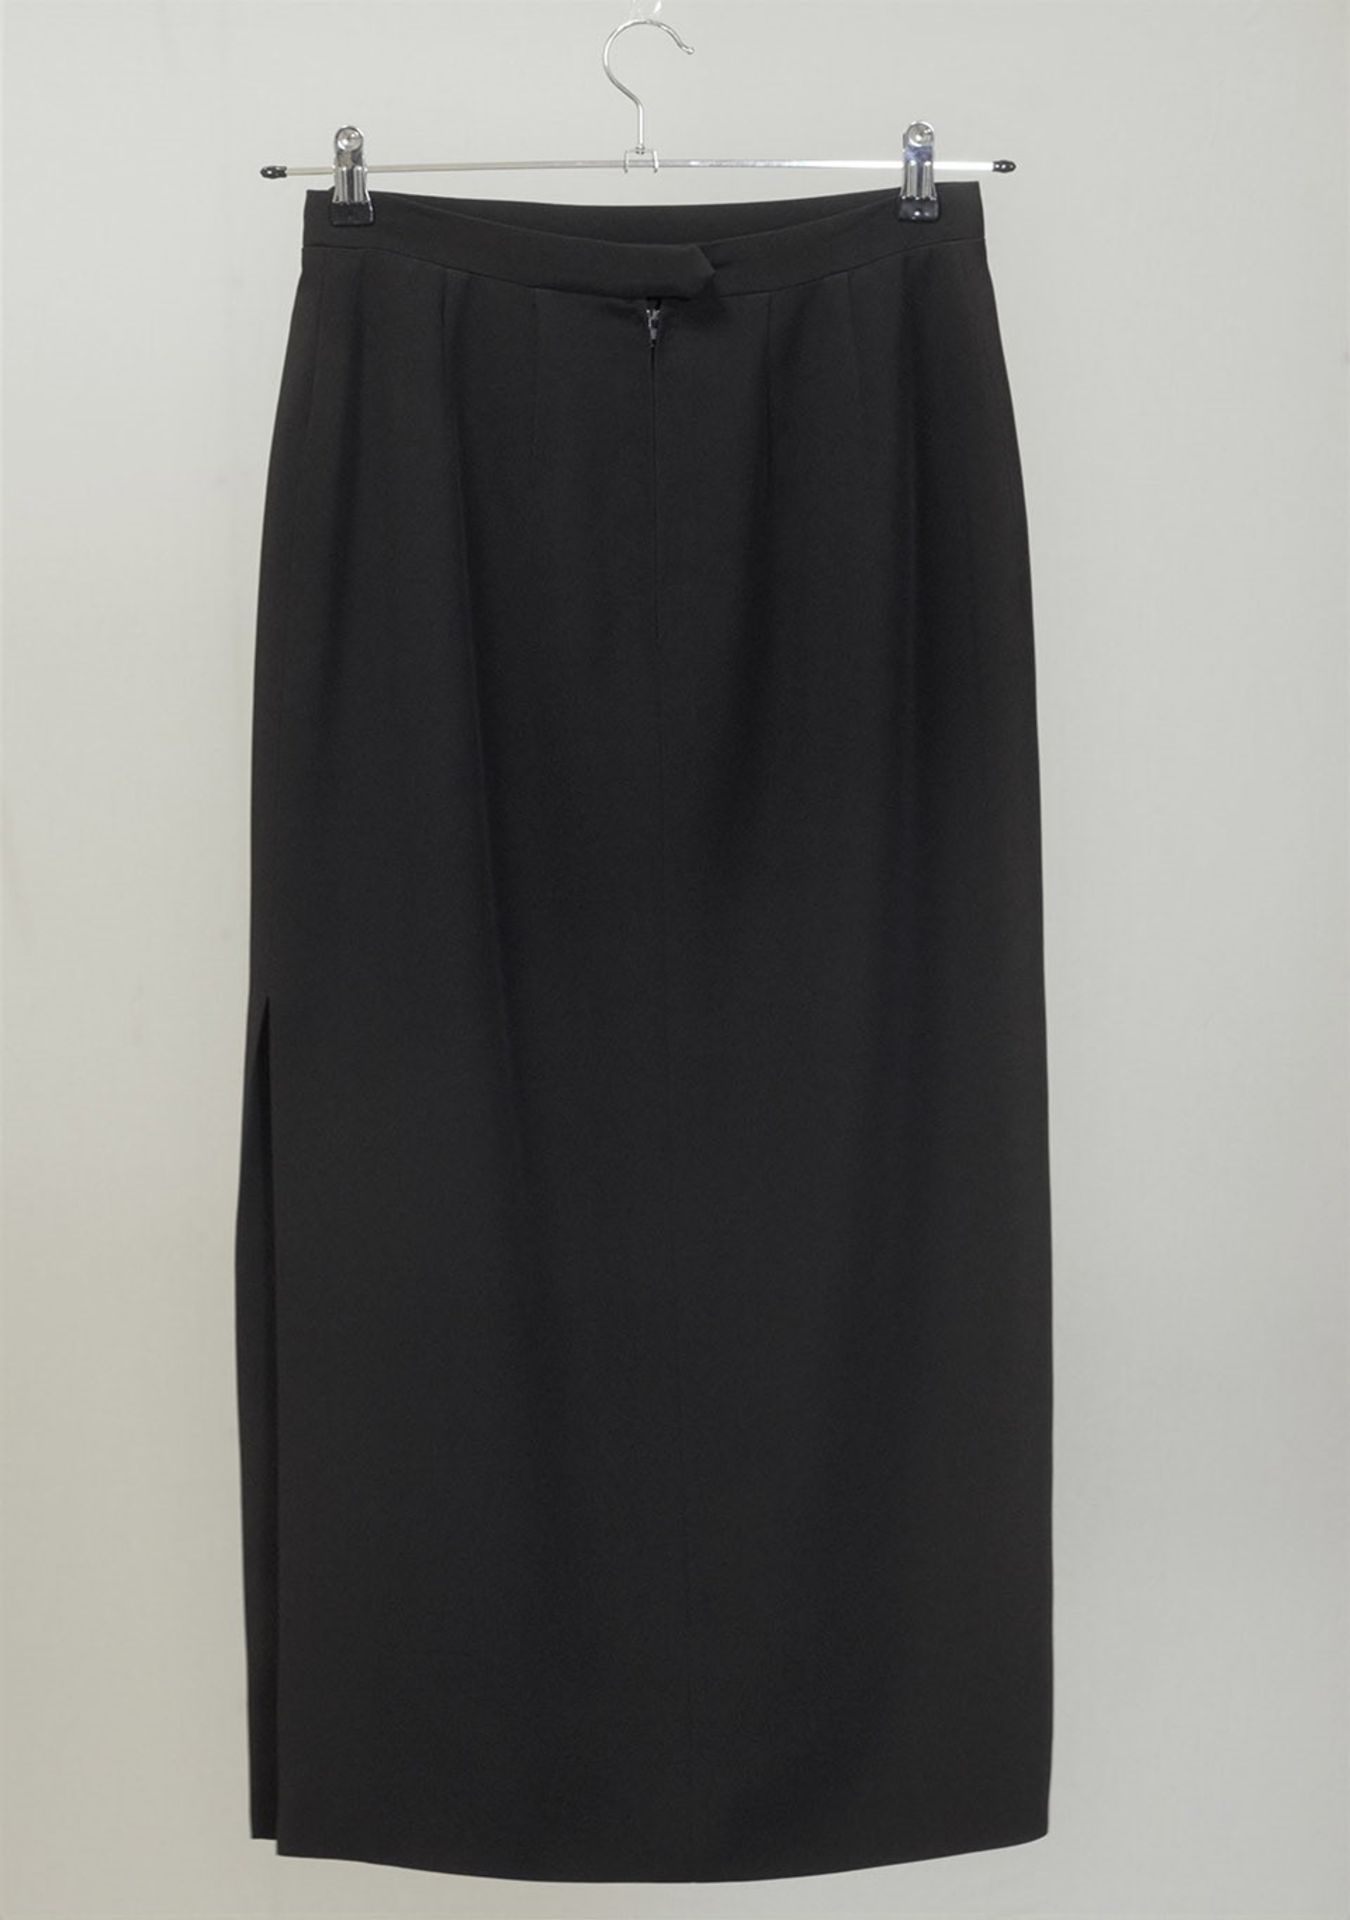 1 x Boutique Le Duc Black Skirt - From a High End Clothing Boutique In The Netherlands - - Image 2 of 7